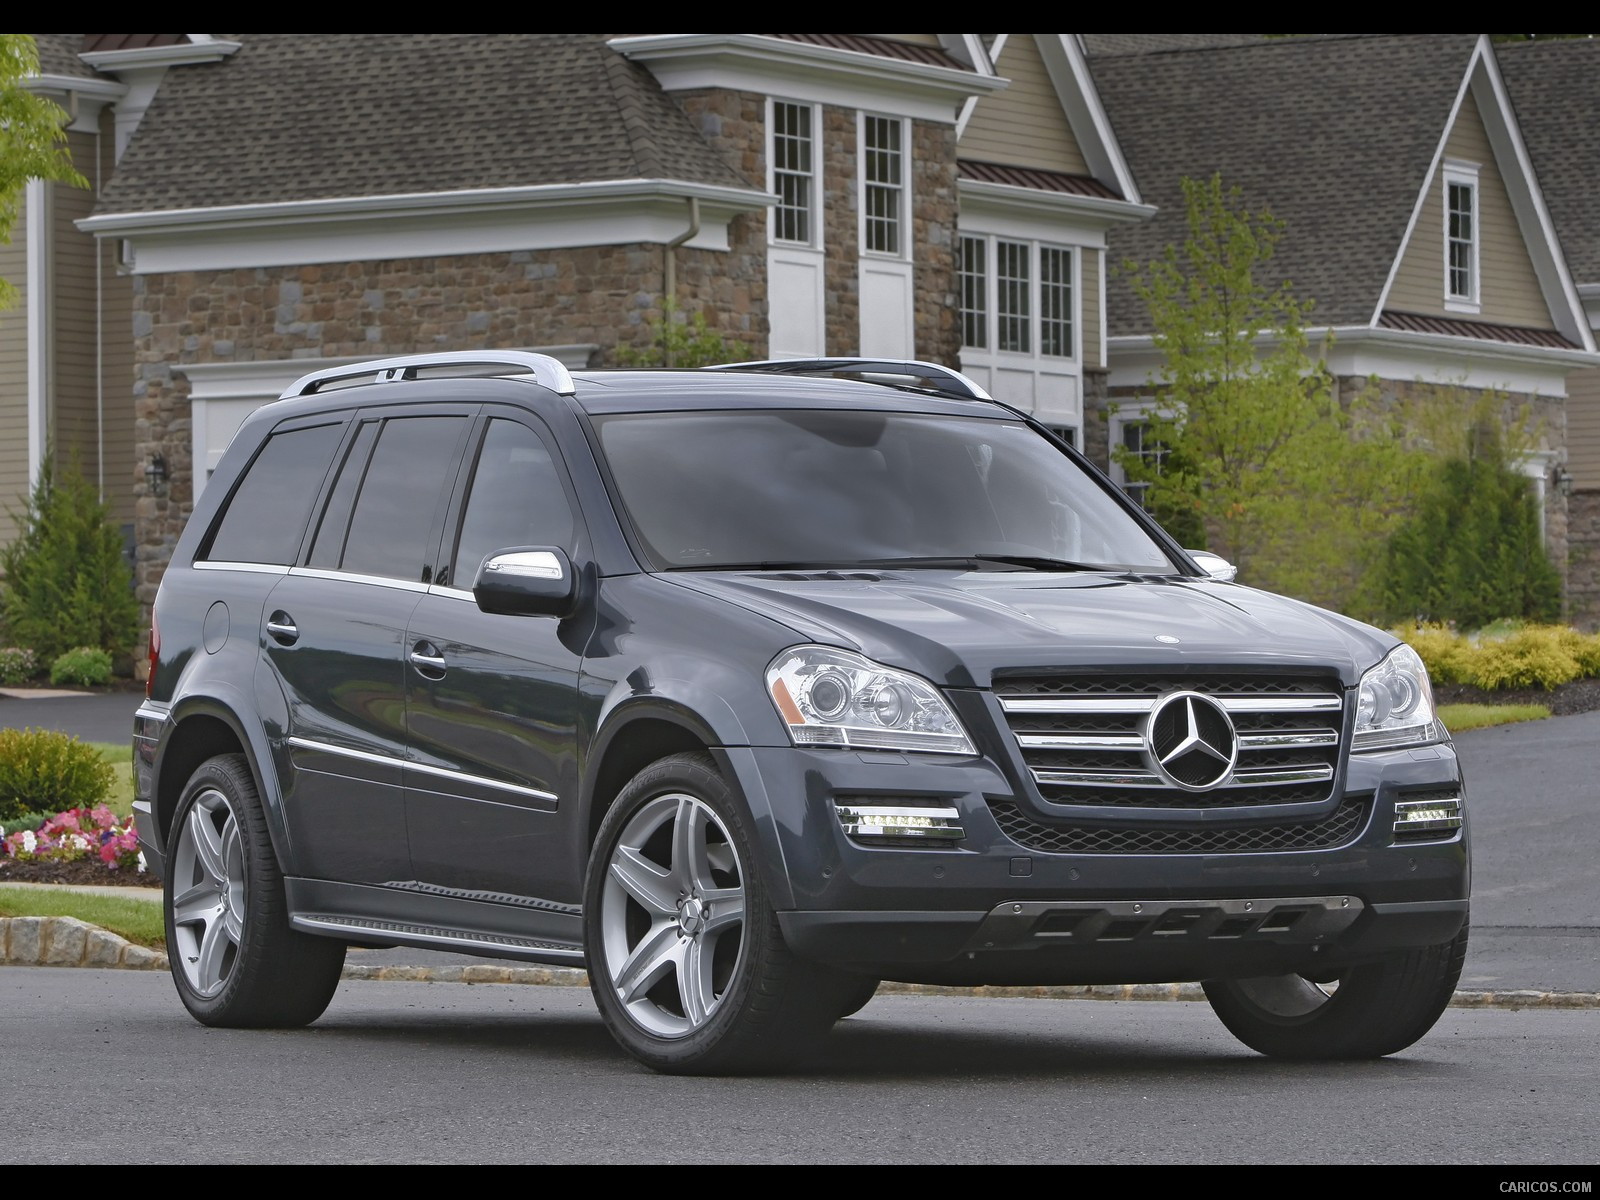 2010 Mercedes-Benz GL550 - Front, #43 of 112